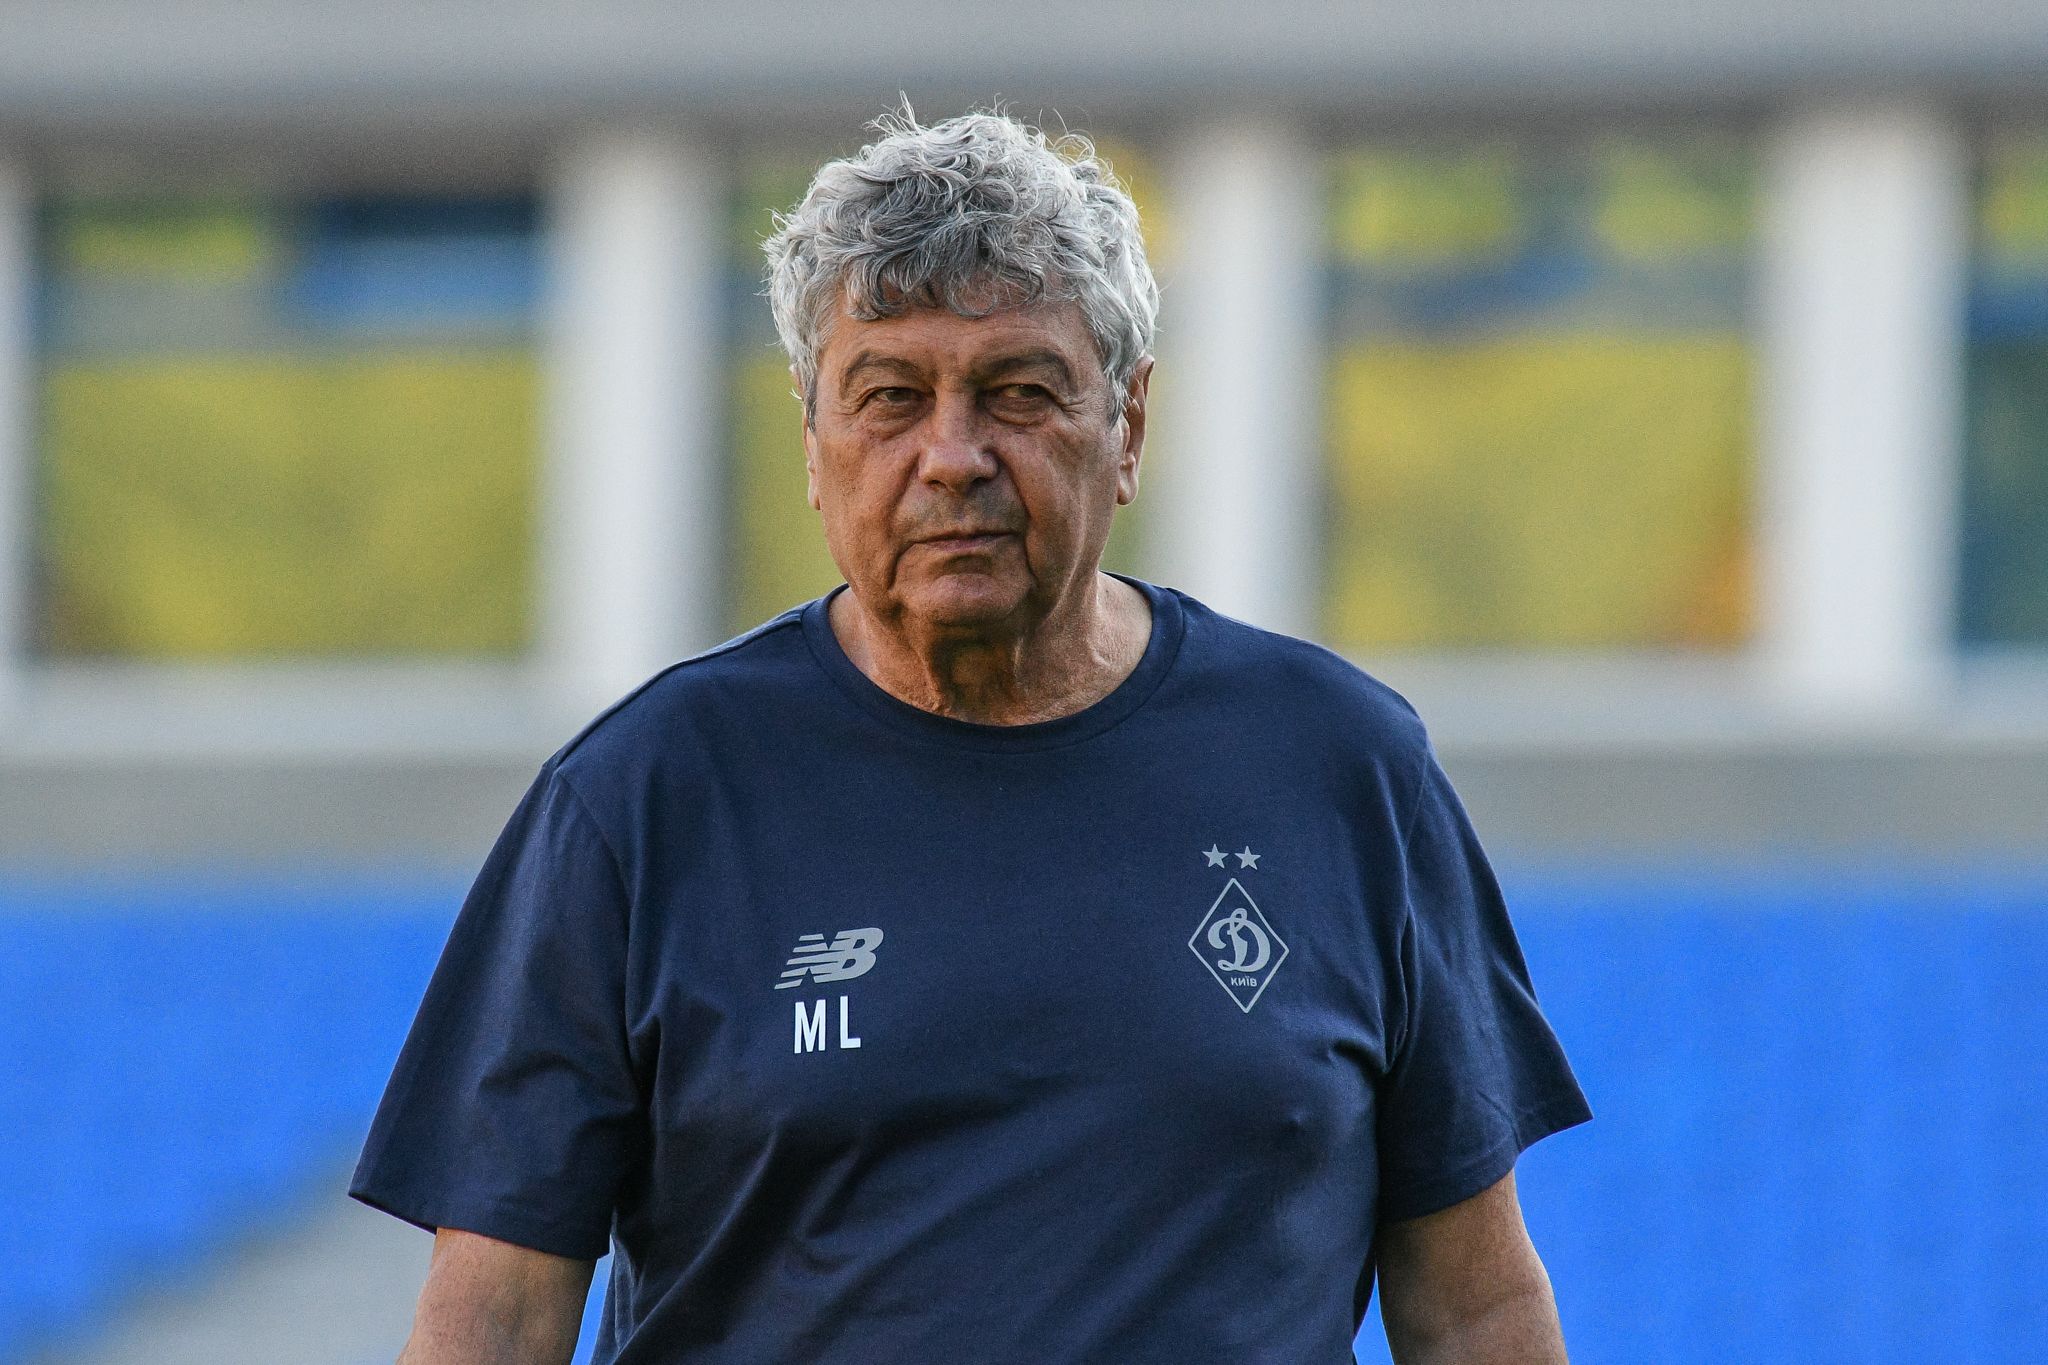 Mircea Lucescu: “I’m satisfied with the game and final score”